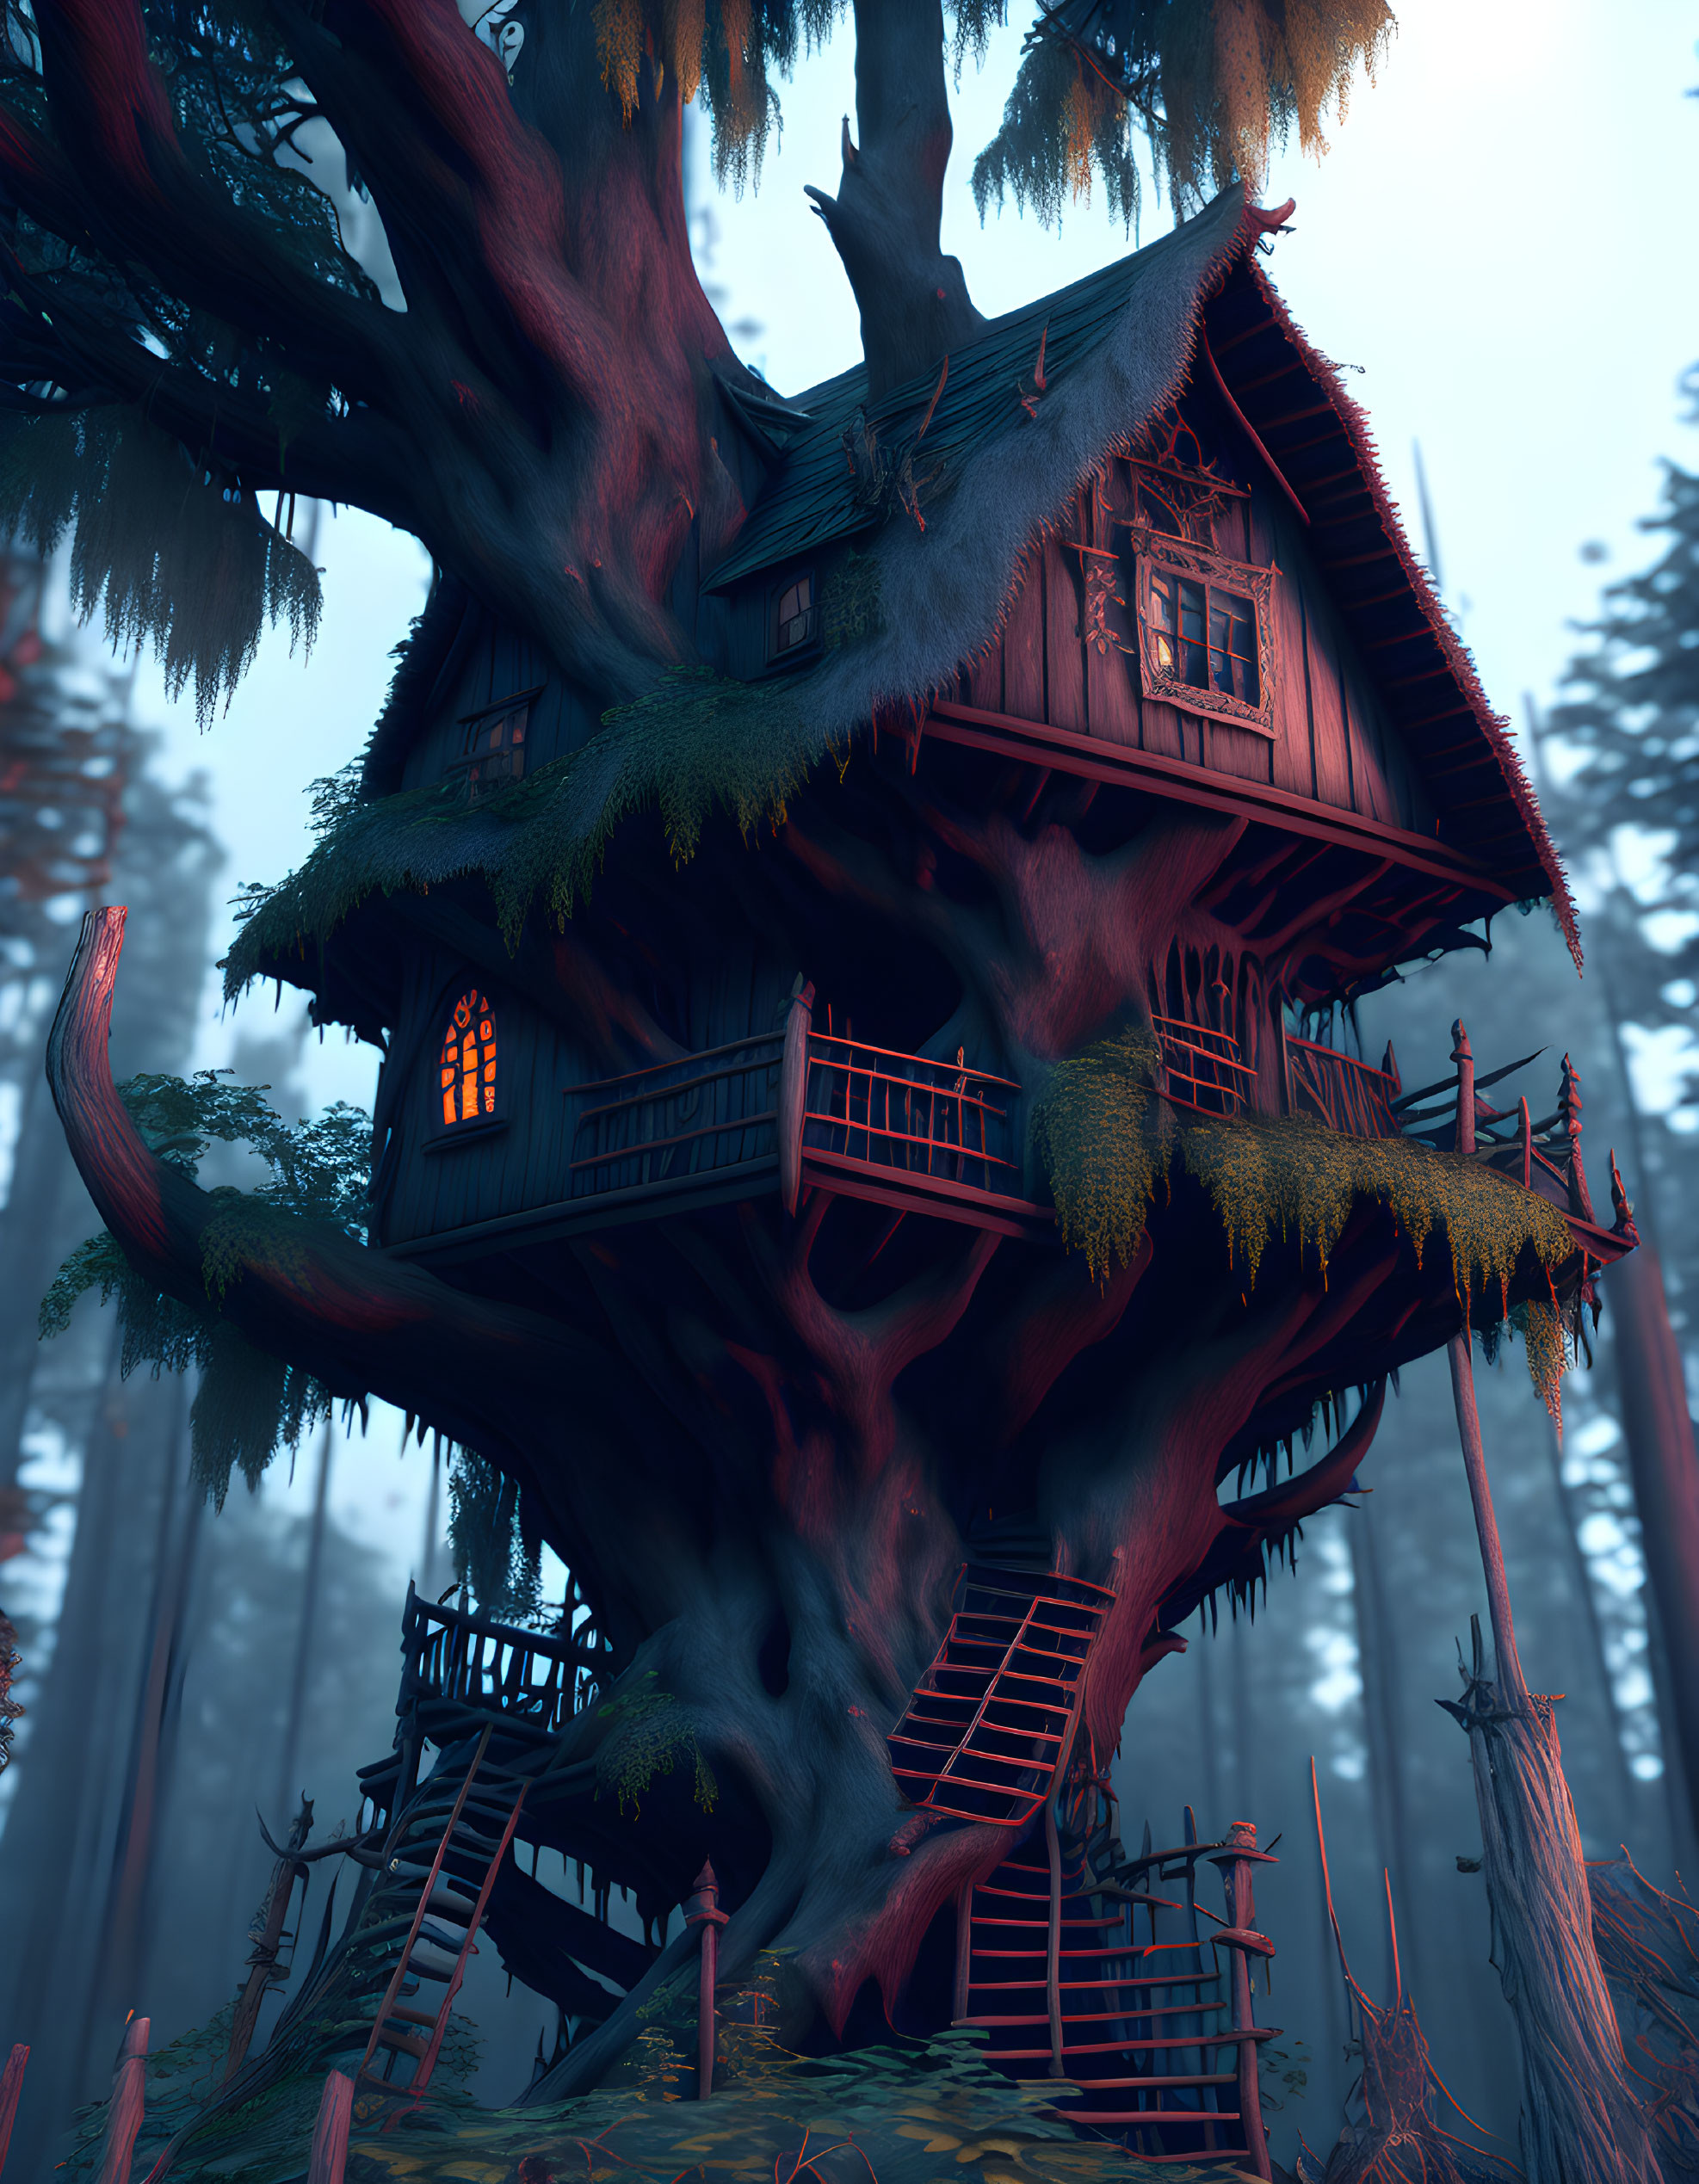 Whimsical treehouse with glowing windows in misty forest